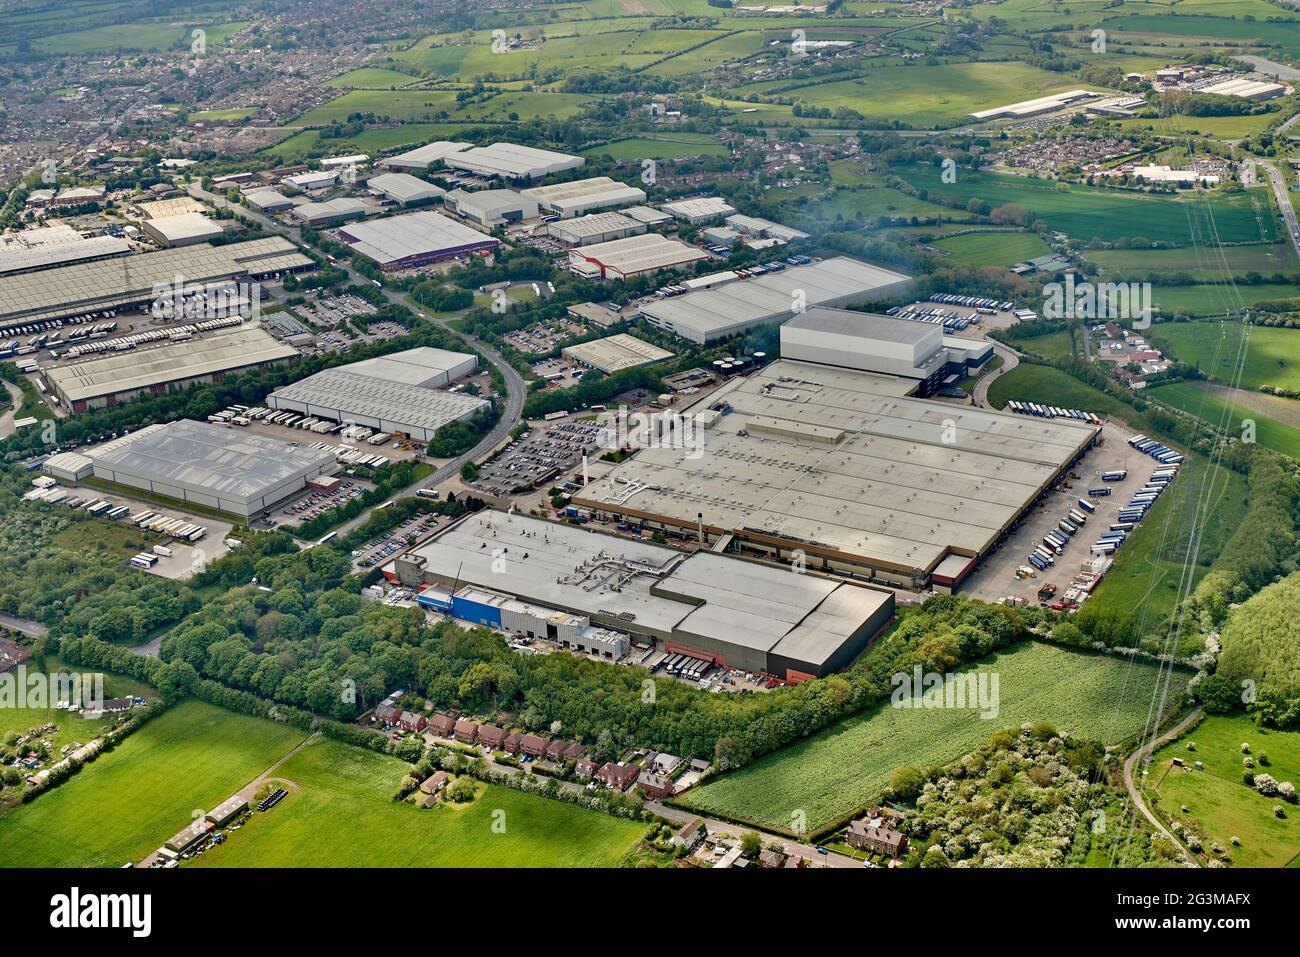 An aerial view of Junction 41 industrial estate, Wakefield, West Yorkshire, Northern England, UK, Coca Cola plant dominant right Stock Photo